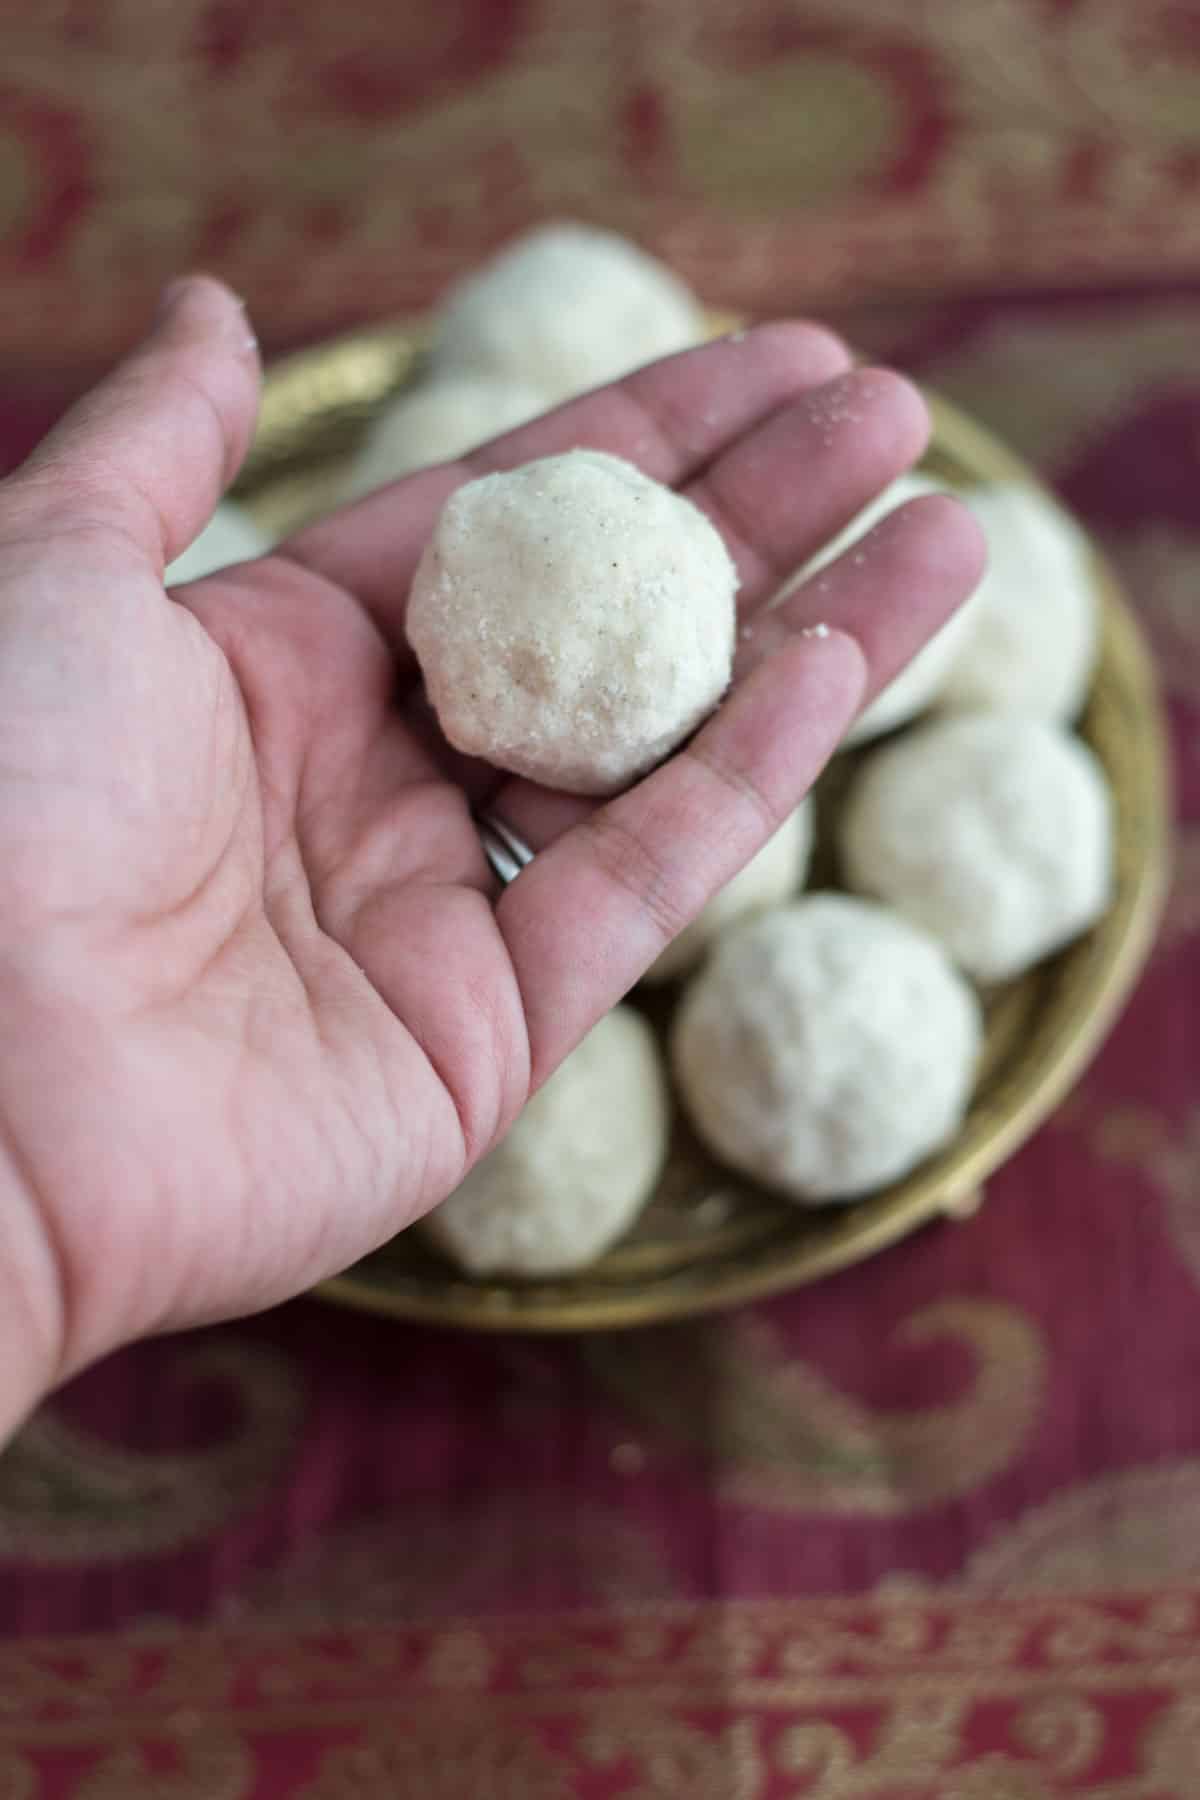 Rolled rava laddoo held in a hand over a stack of laddoos